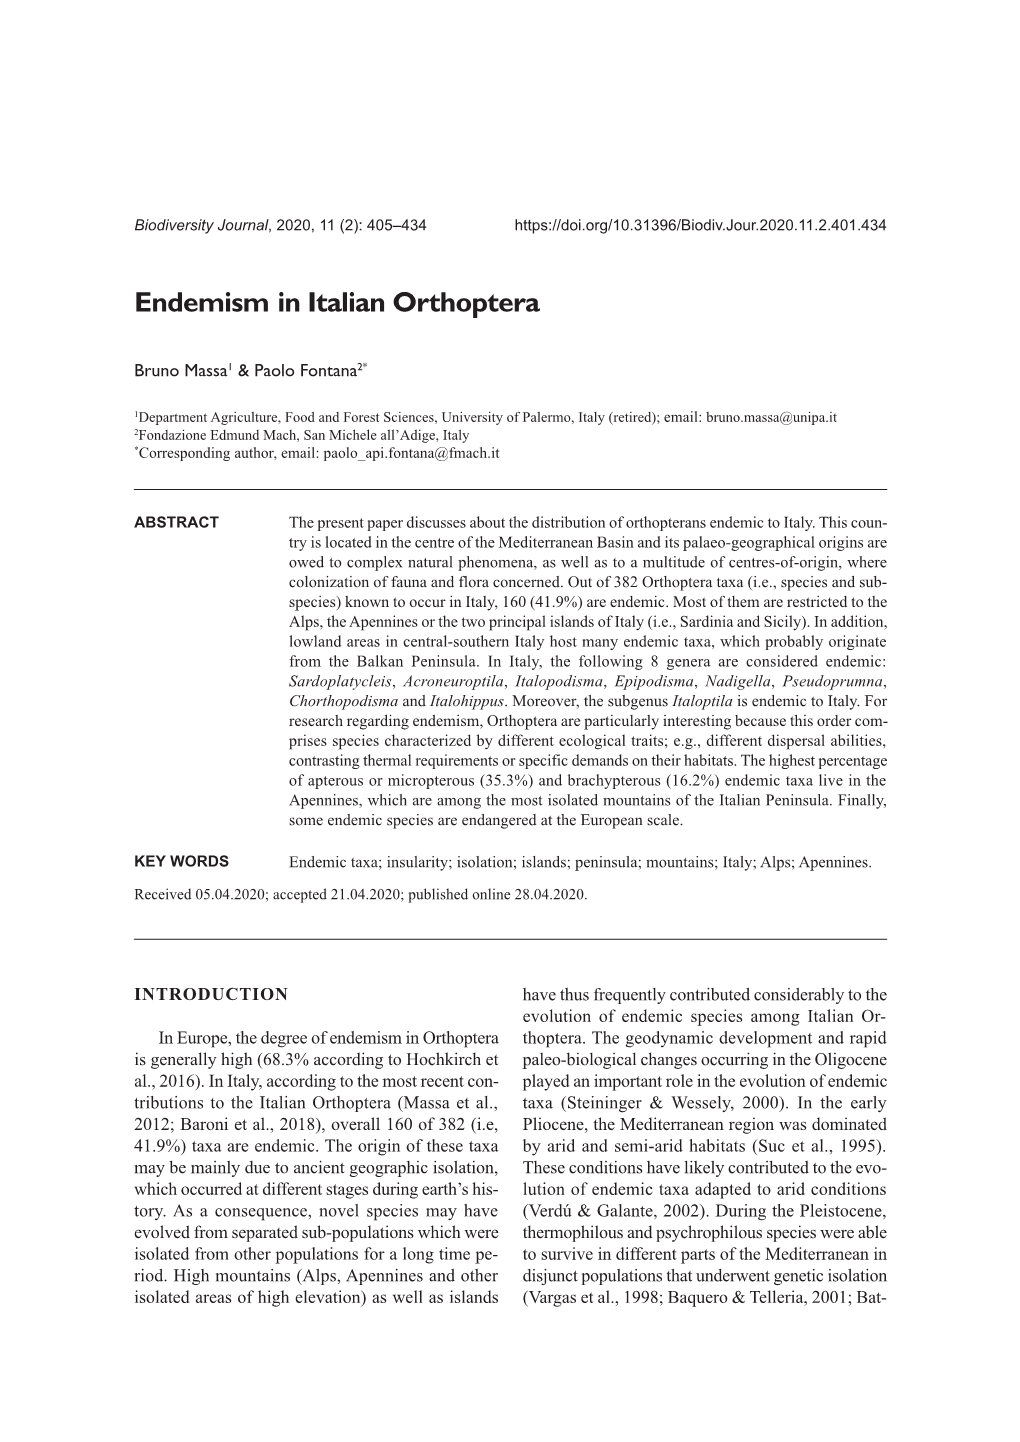 Endemism in Italian Orthoptera